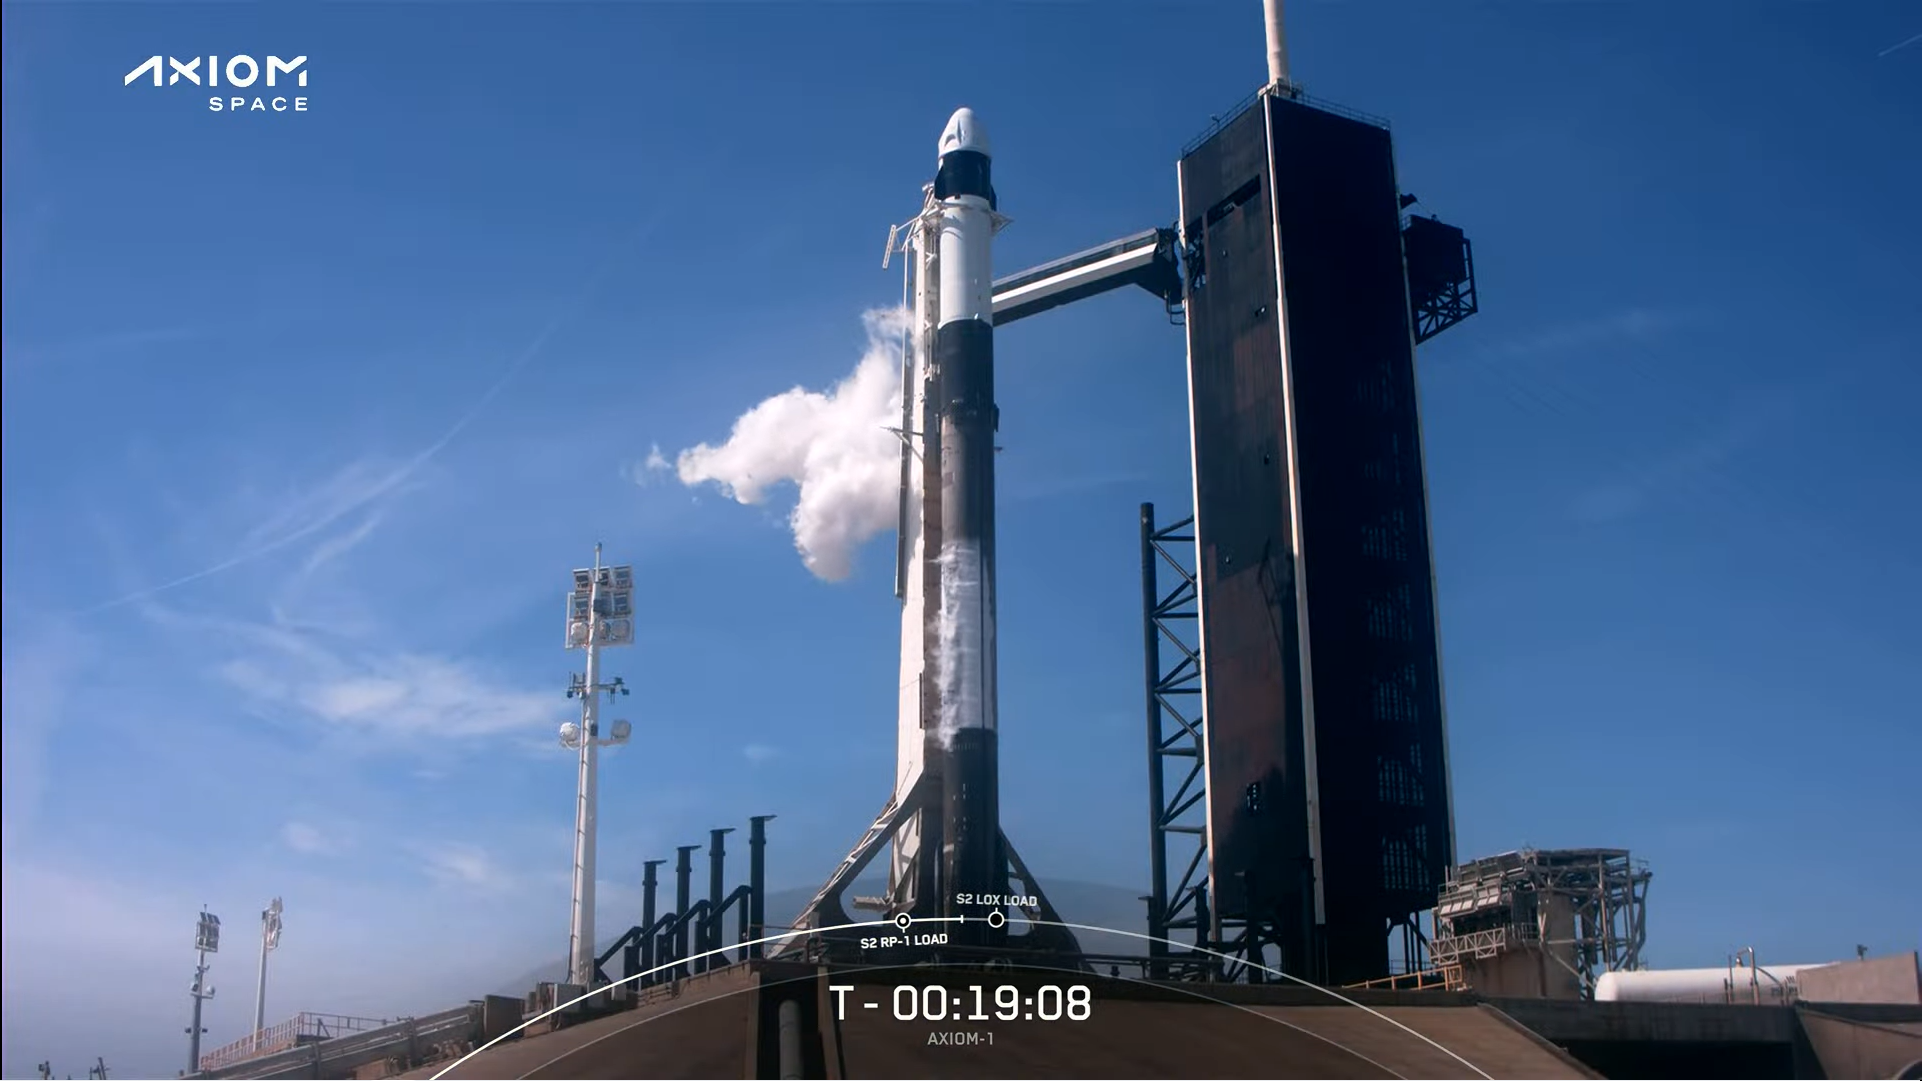 A view of the Ax-1 Falcon 9 rocket during the fueling process for launch on April 8, 2022.